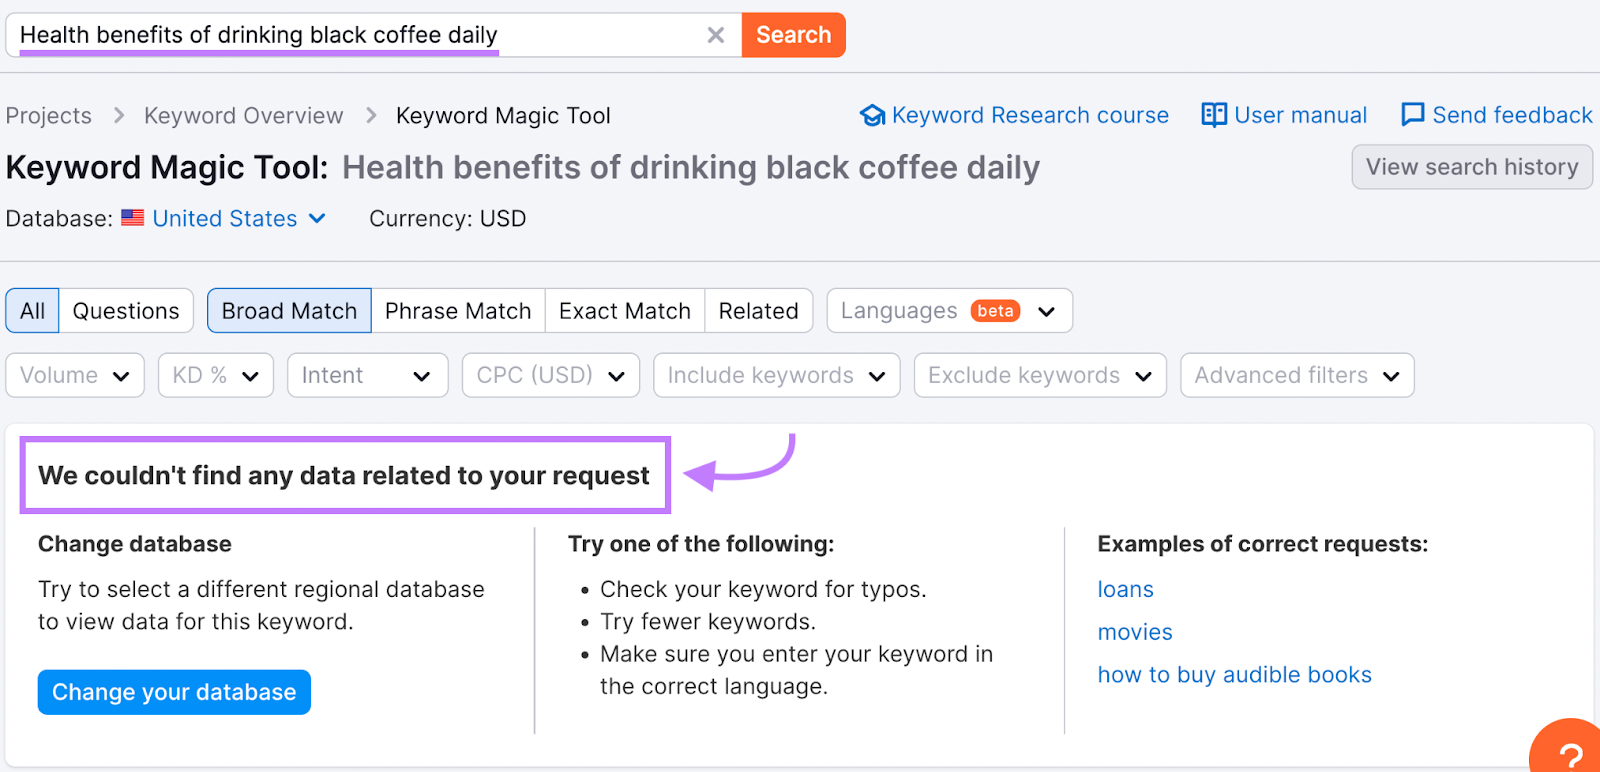 Keyword Magic Tool results for "health benefits of drinking black coffee daily" show no results